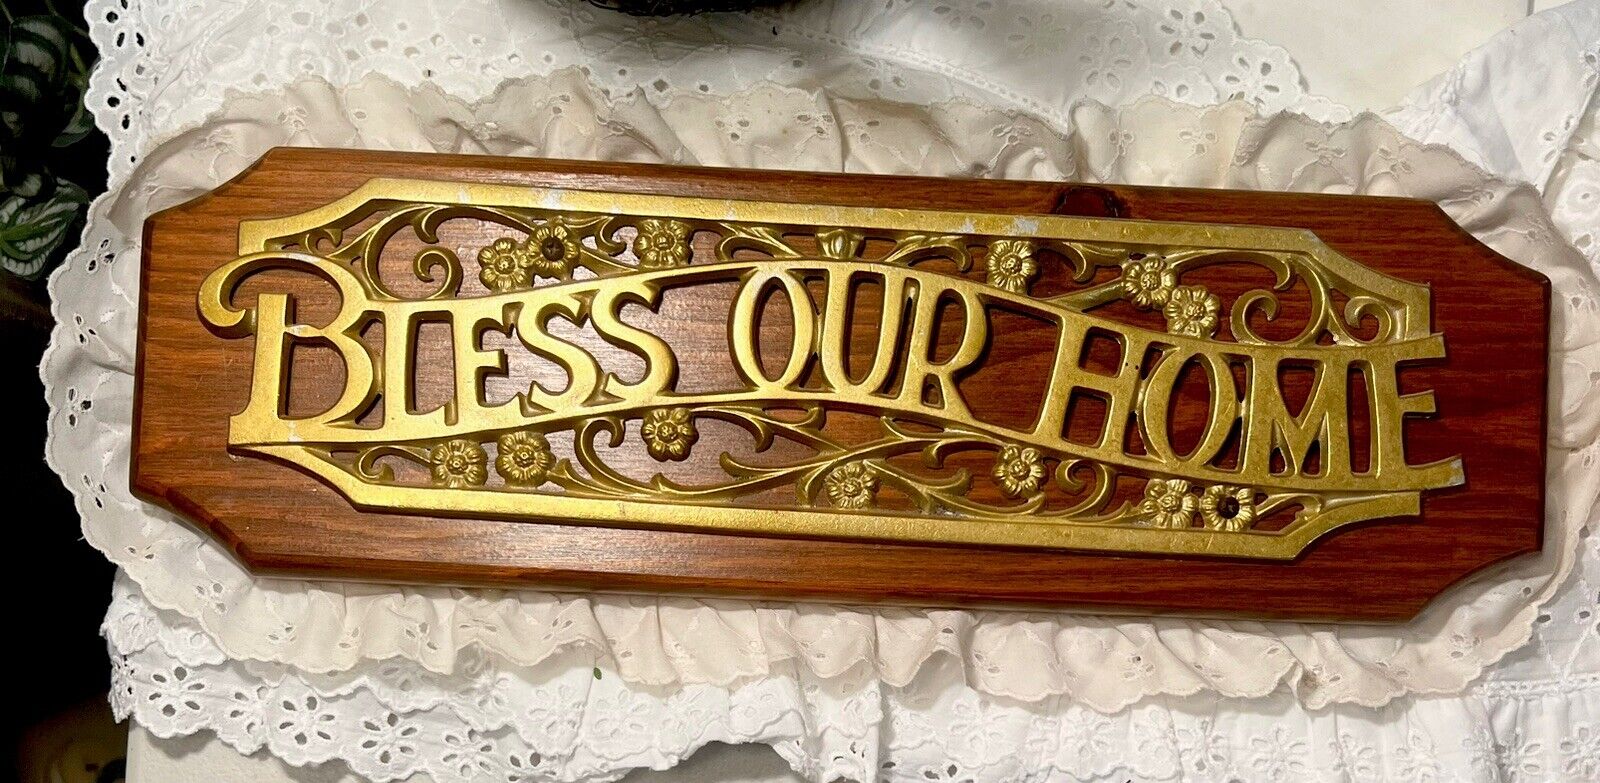 Vtg BLESS OUR HOME Wood Sign Country Decor Eyelet LaceMetal Floral Gold 17x5.25